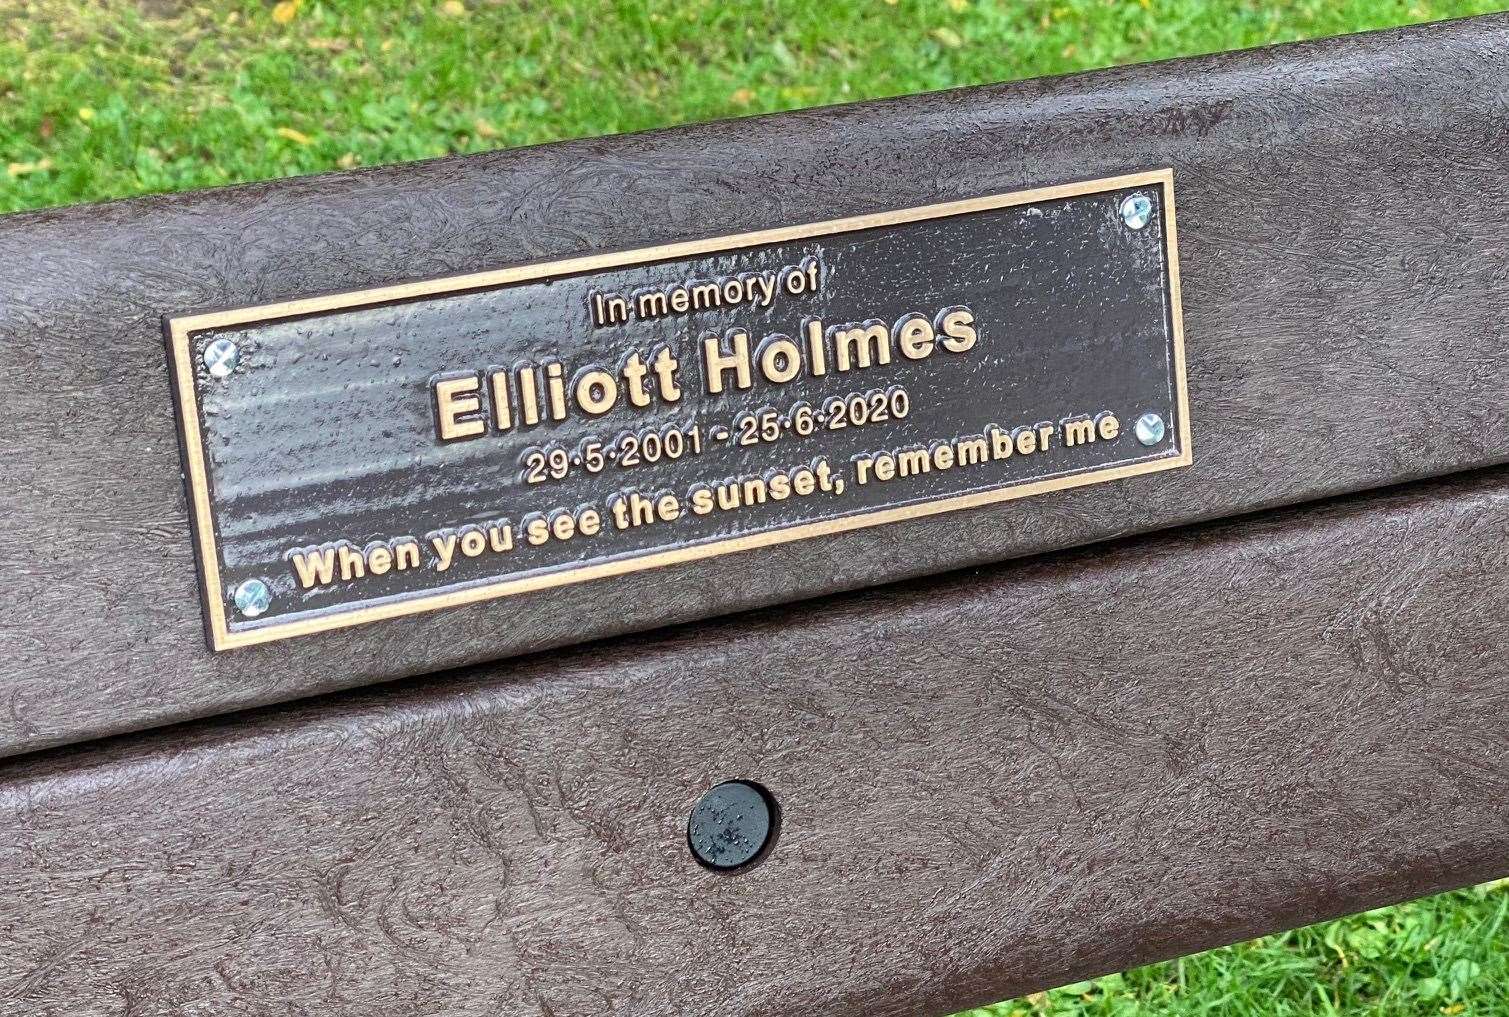 A memorial bench was unveiled for Elliott Holmes in Istead Rise last month